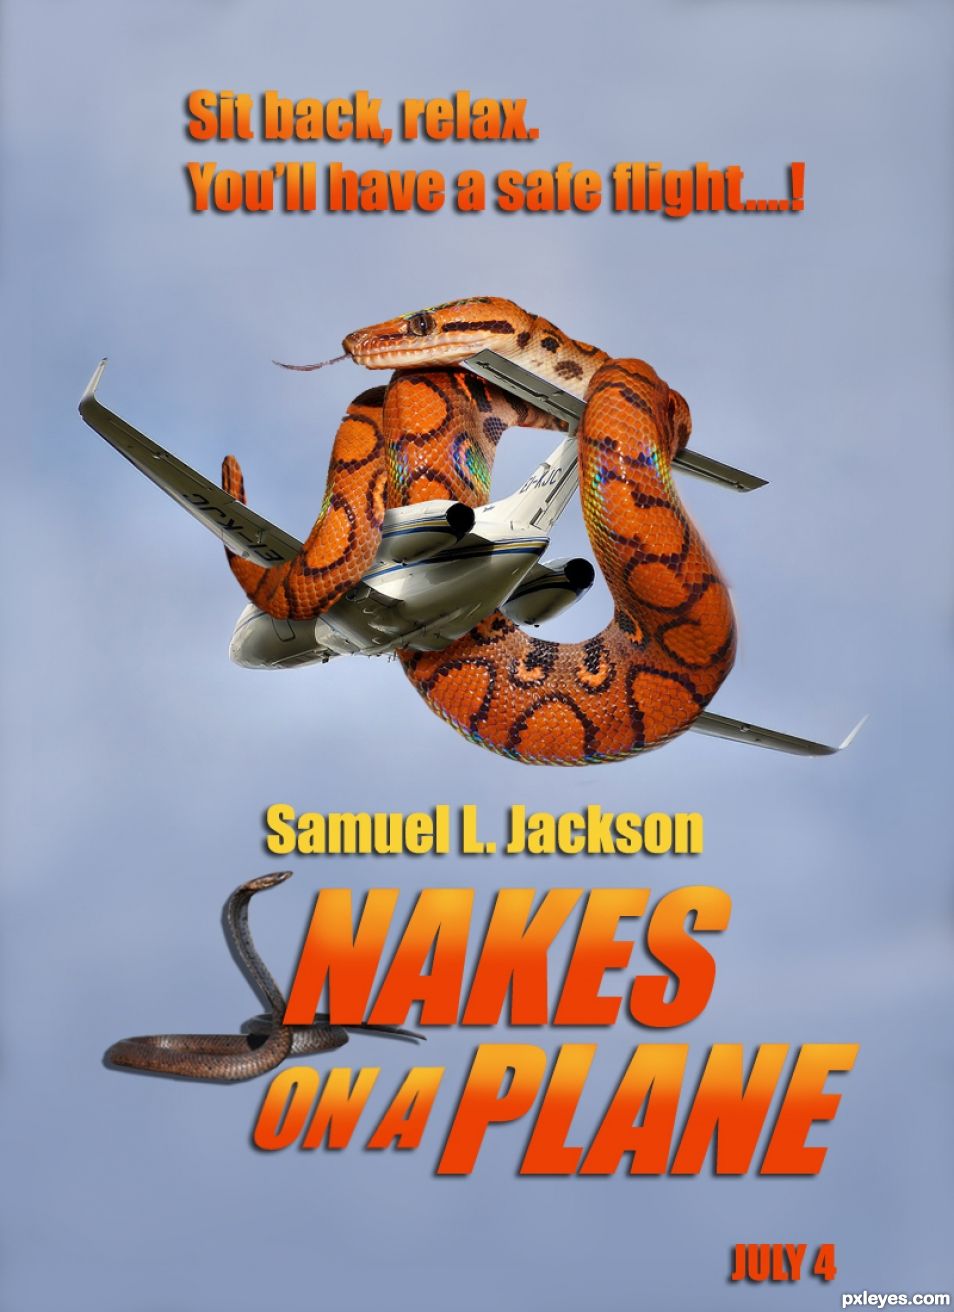 Creation of Snakes On A Plane: Step 4